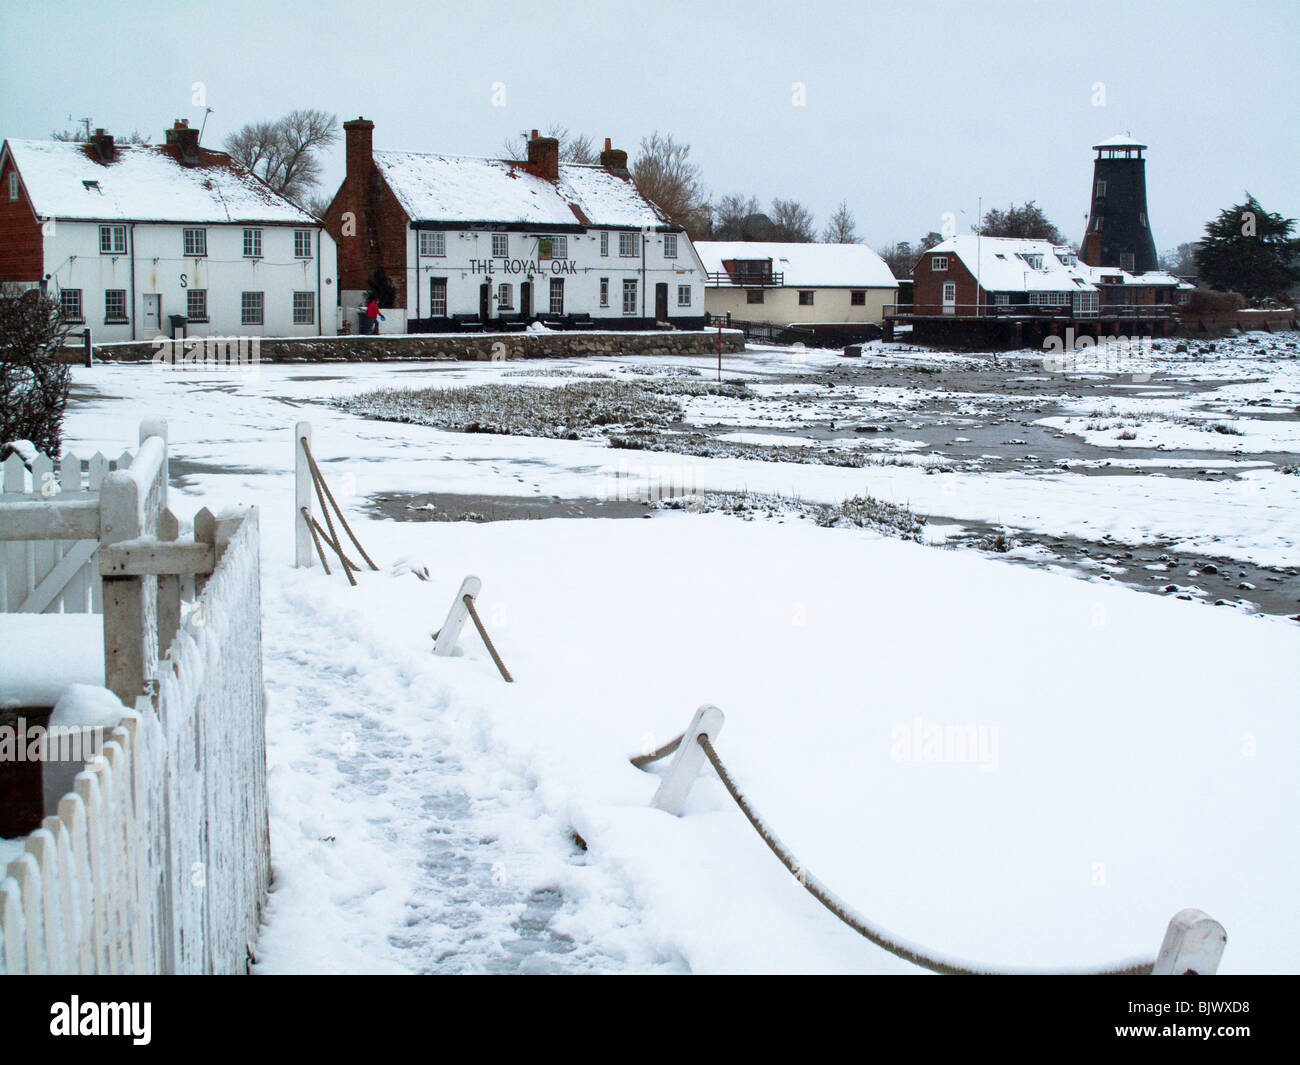 The Royal Oak and Mill, Langstone, in the snow Stock Photo